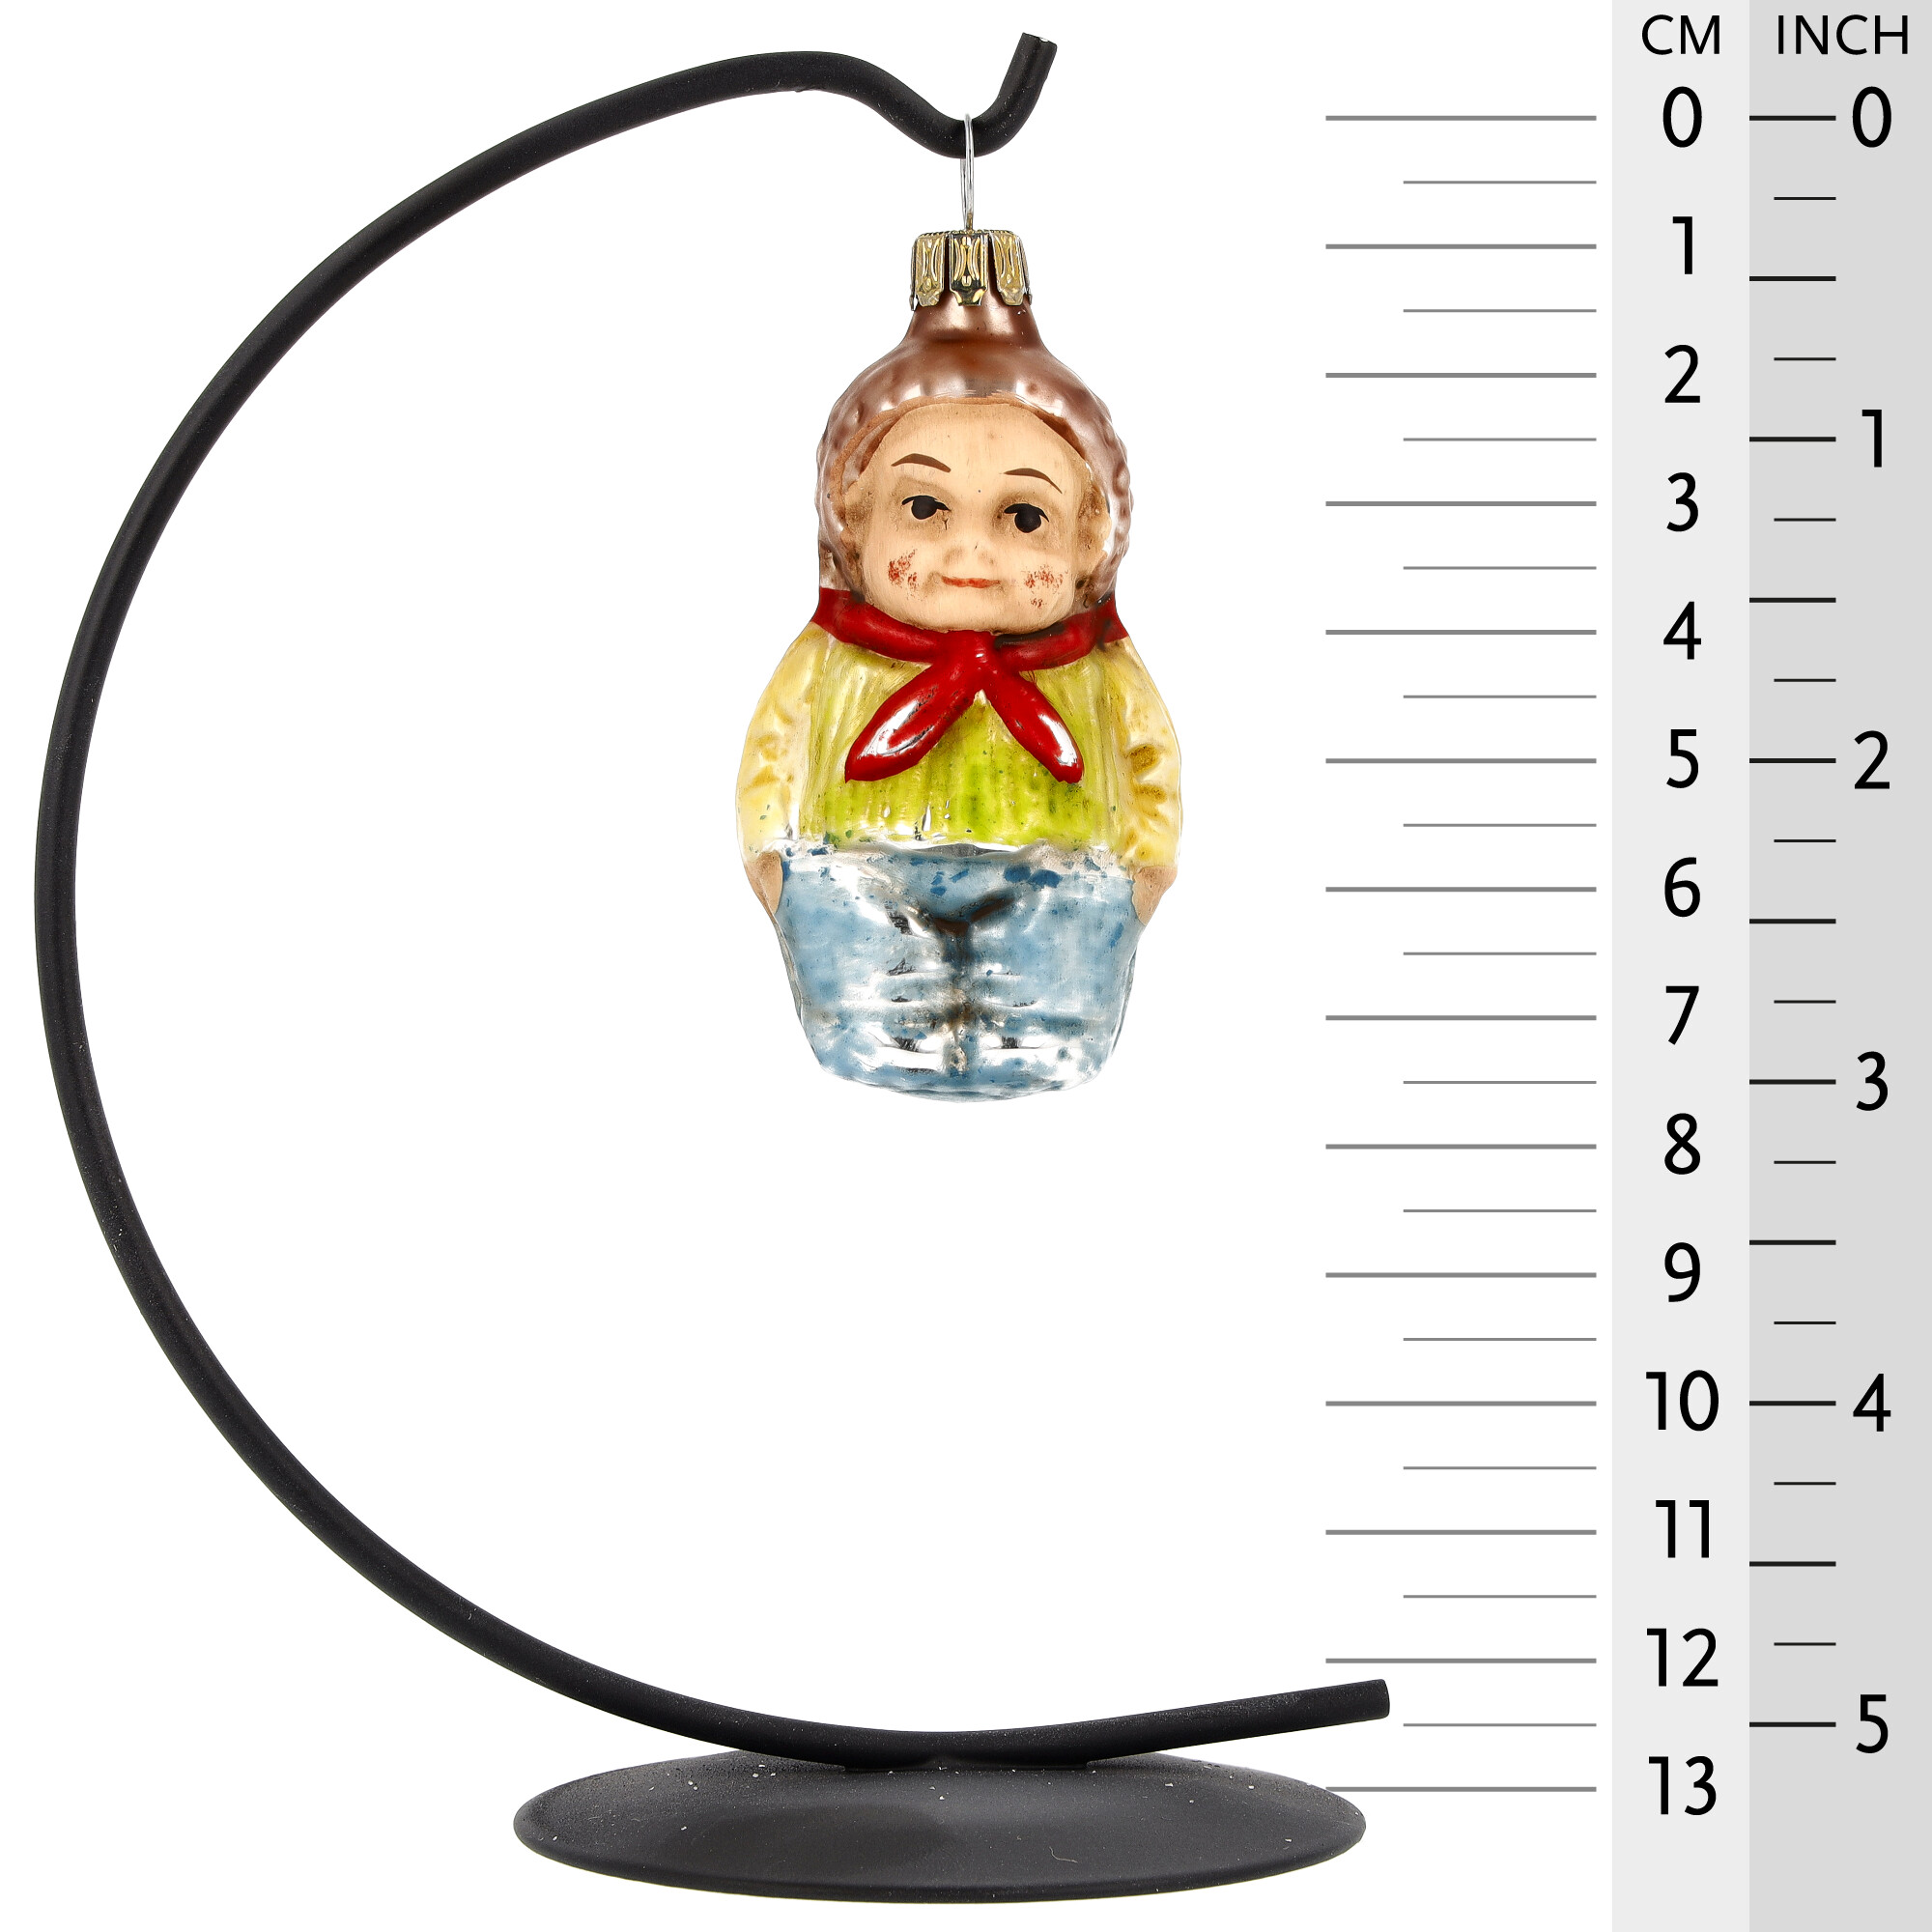 Retro Vintage style Christmas Glass Ornament - Boy with cap